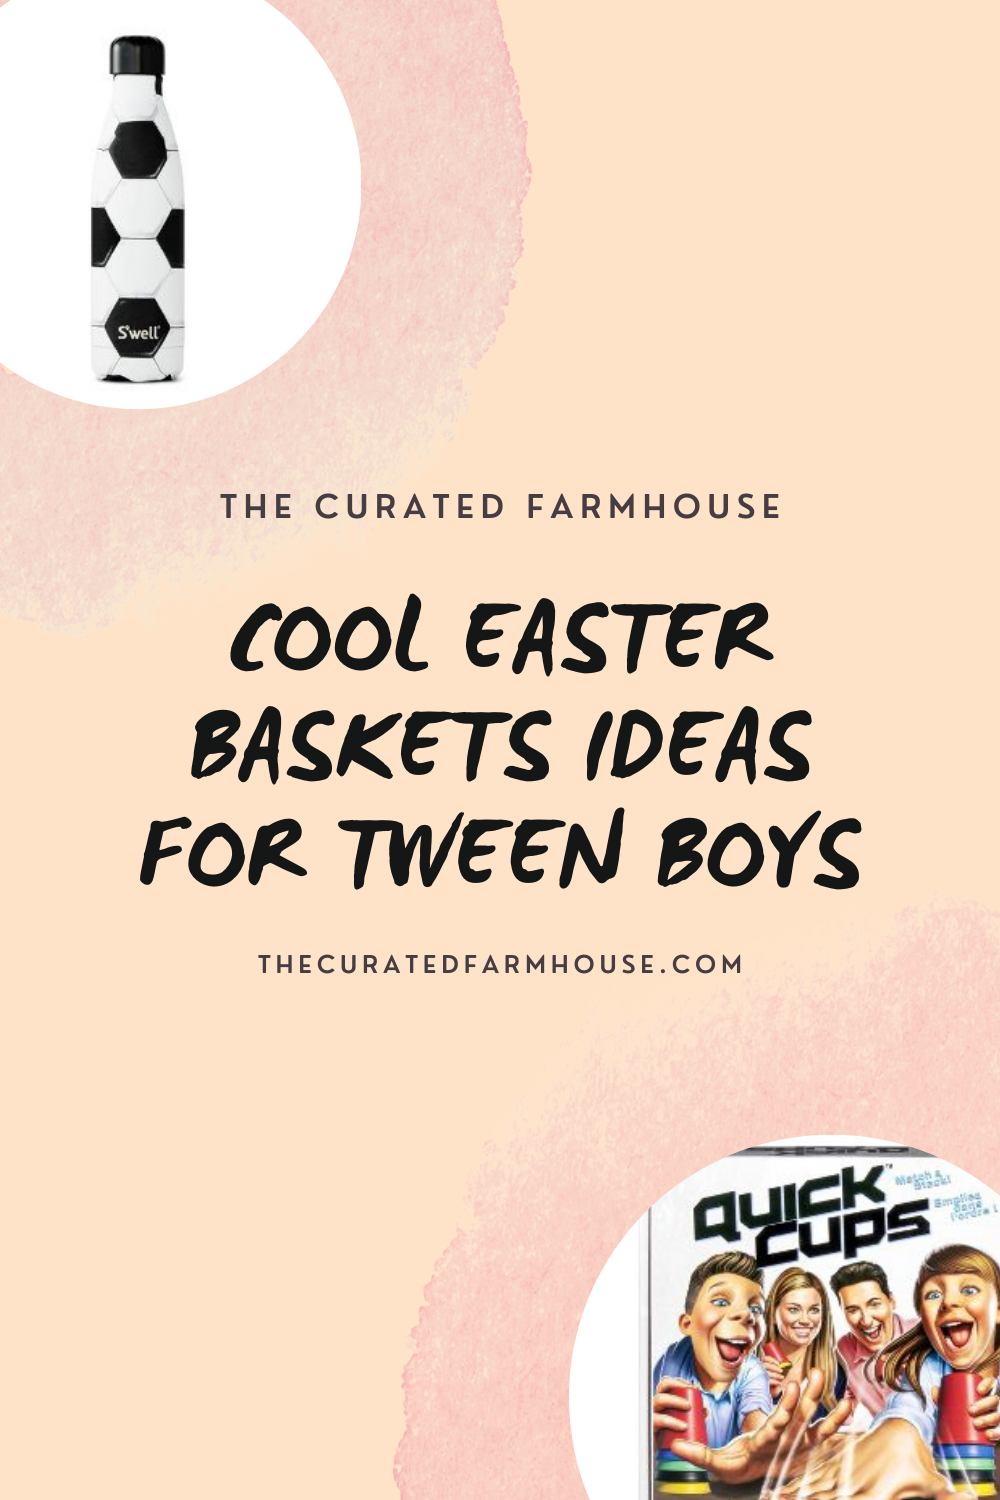 Cool Easter Baskets Ideas for Tween Boys